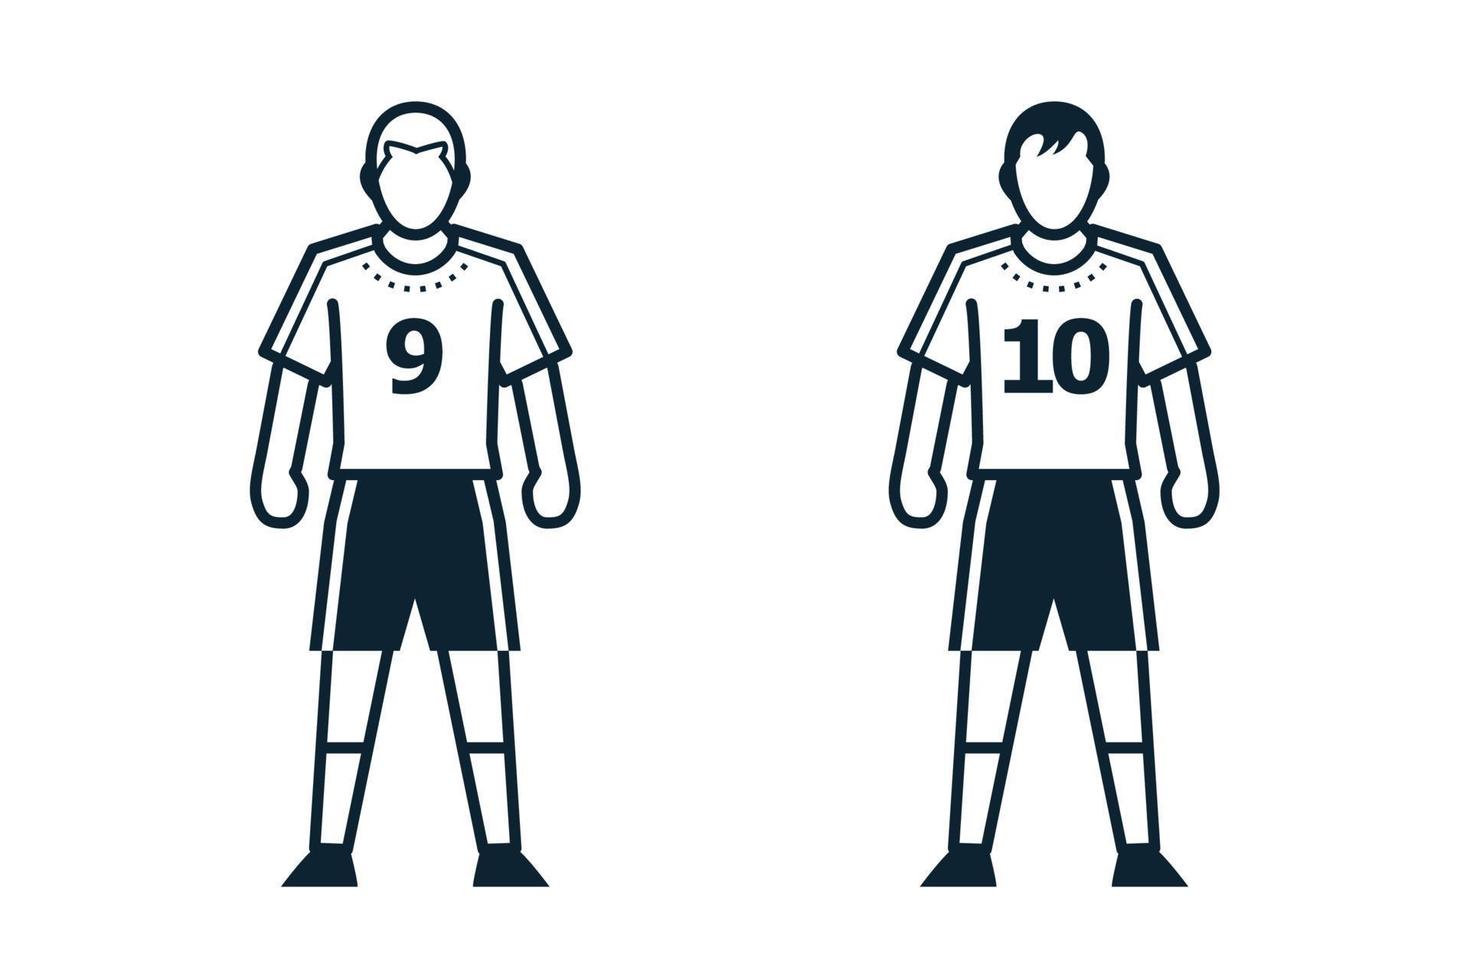 Soccer Player, People and Clothing icons with White Background vector